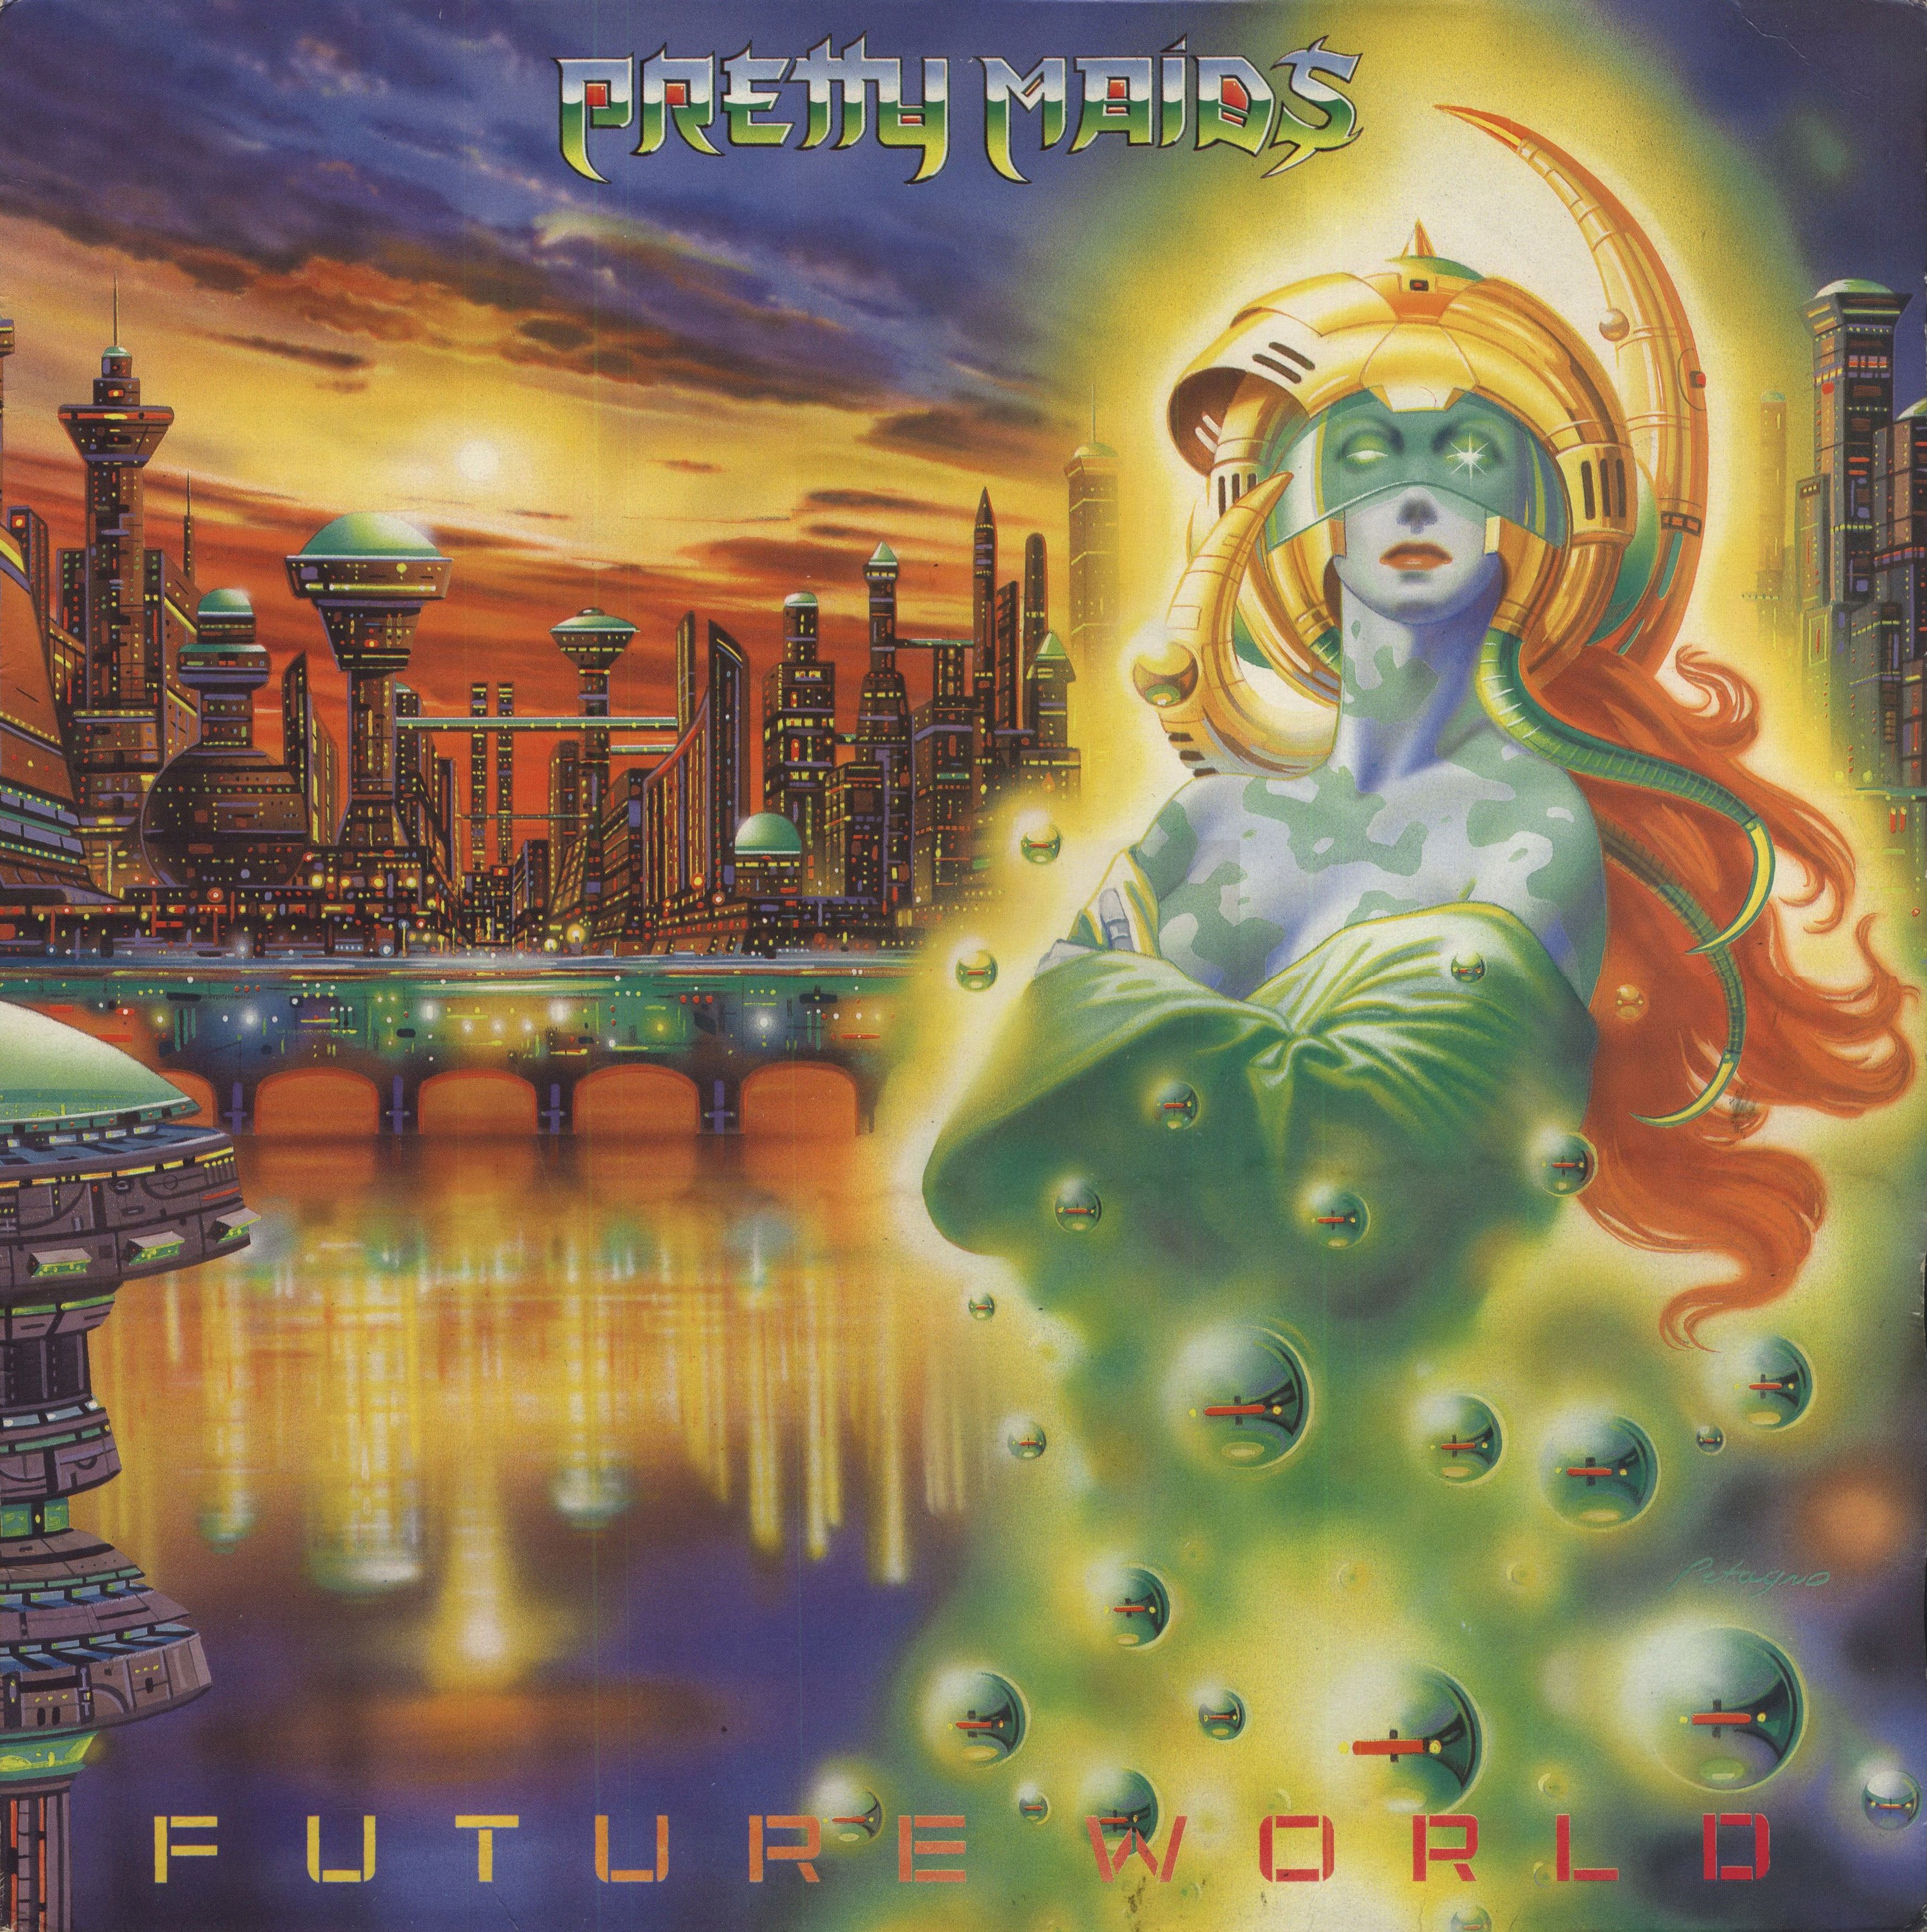 Art for Rodeo by Pretty Maids